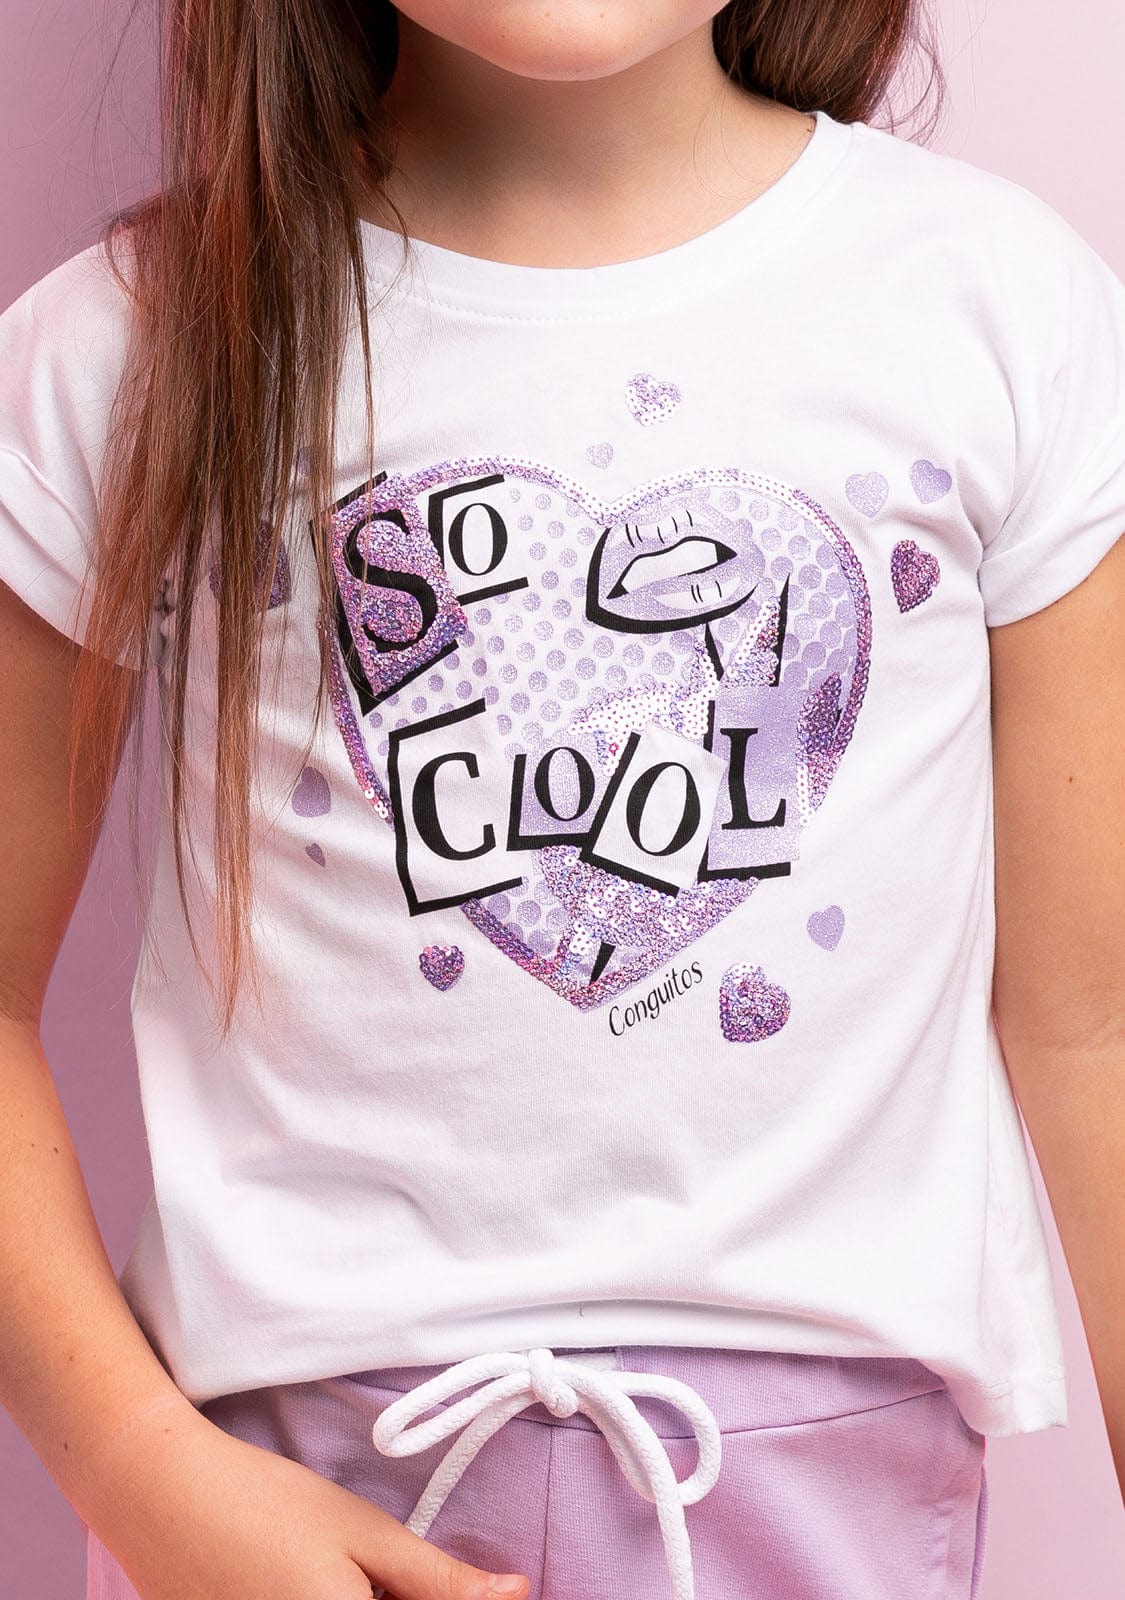 CONGUITOS TEXTIL Clothing Girl's Cool Sequins T-shirt